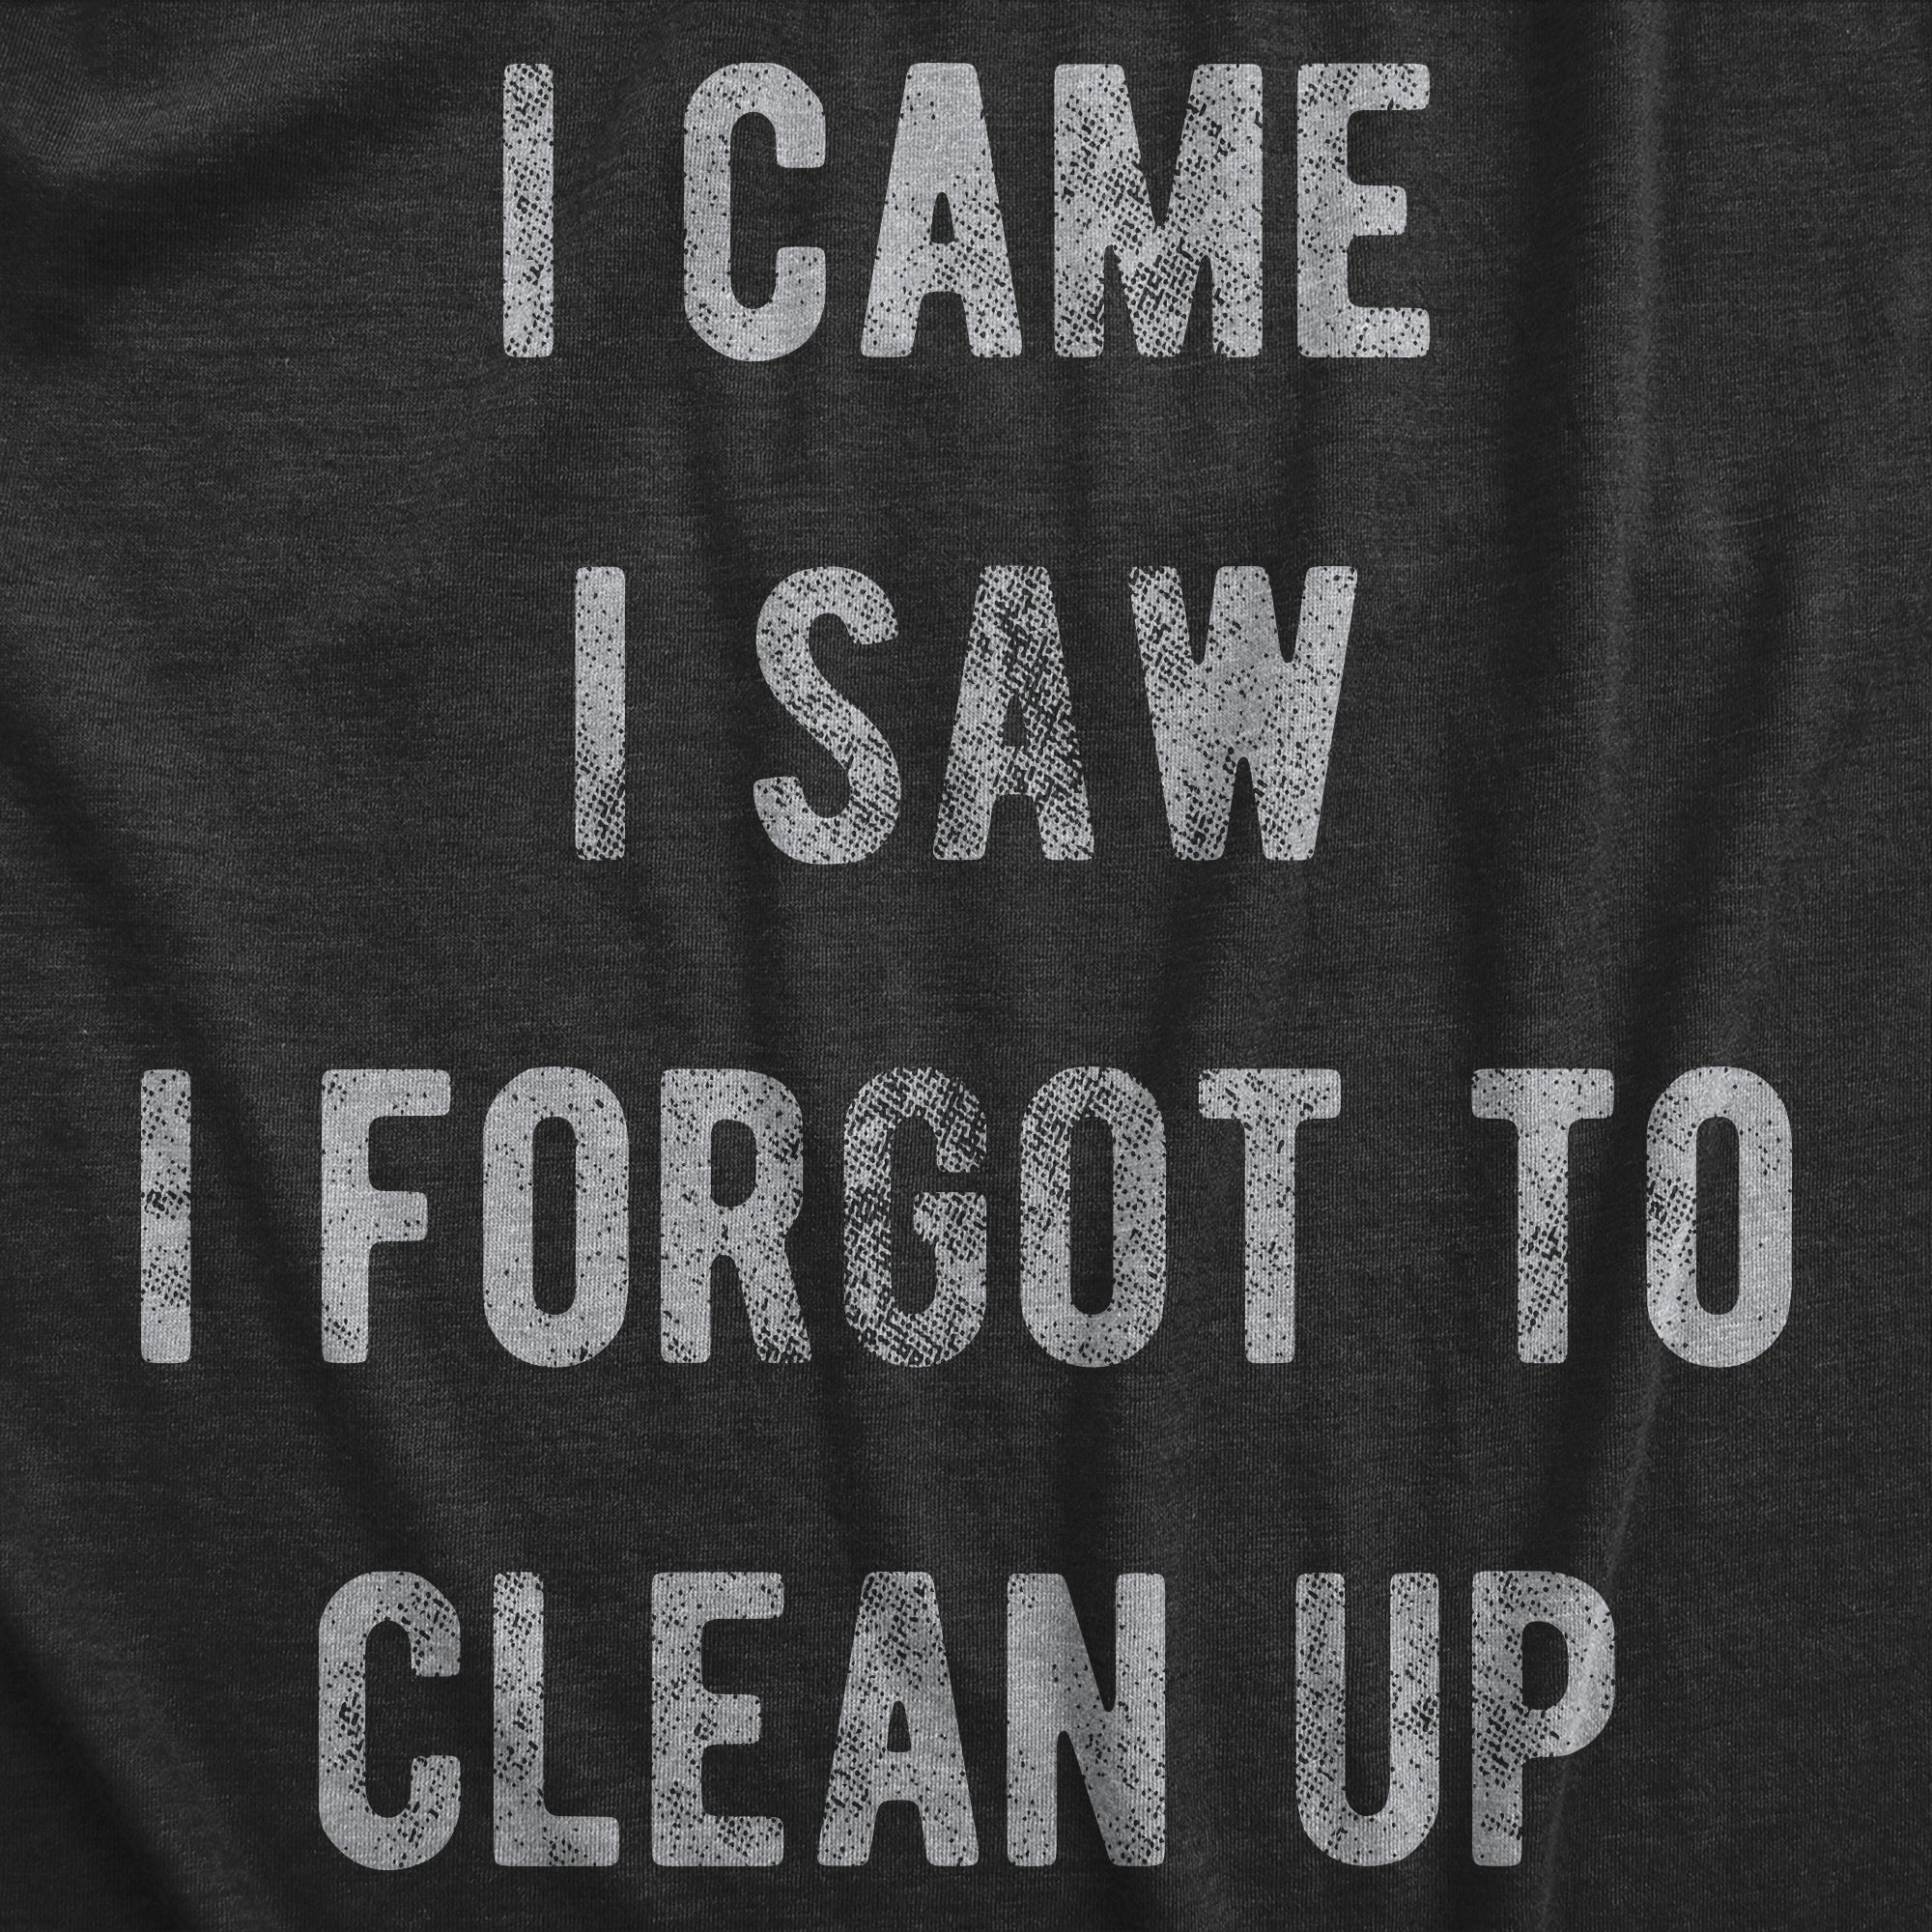 Funny Heather Black - CLEAN I Came I Saw I Forgot To Clean Up Womens T Shirt Nerdy Sarcastic Tee